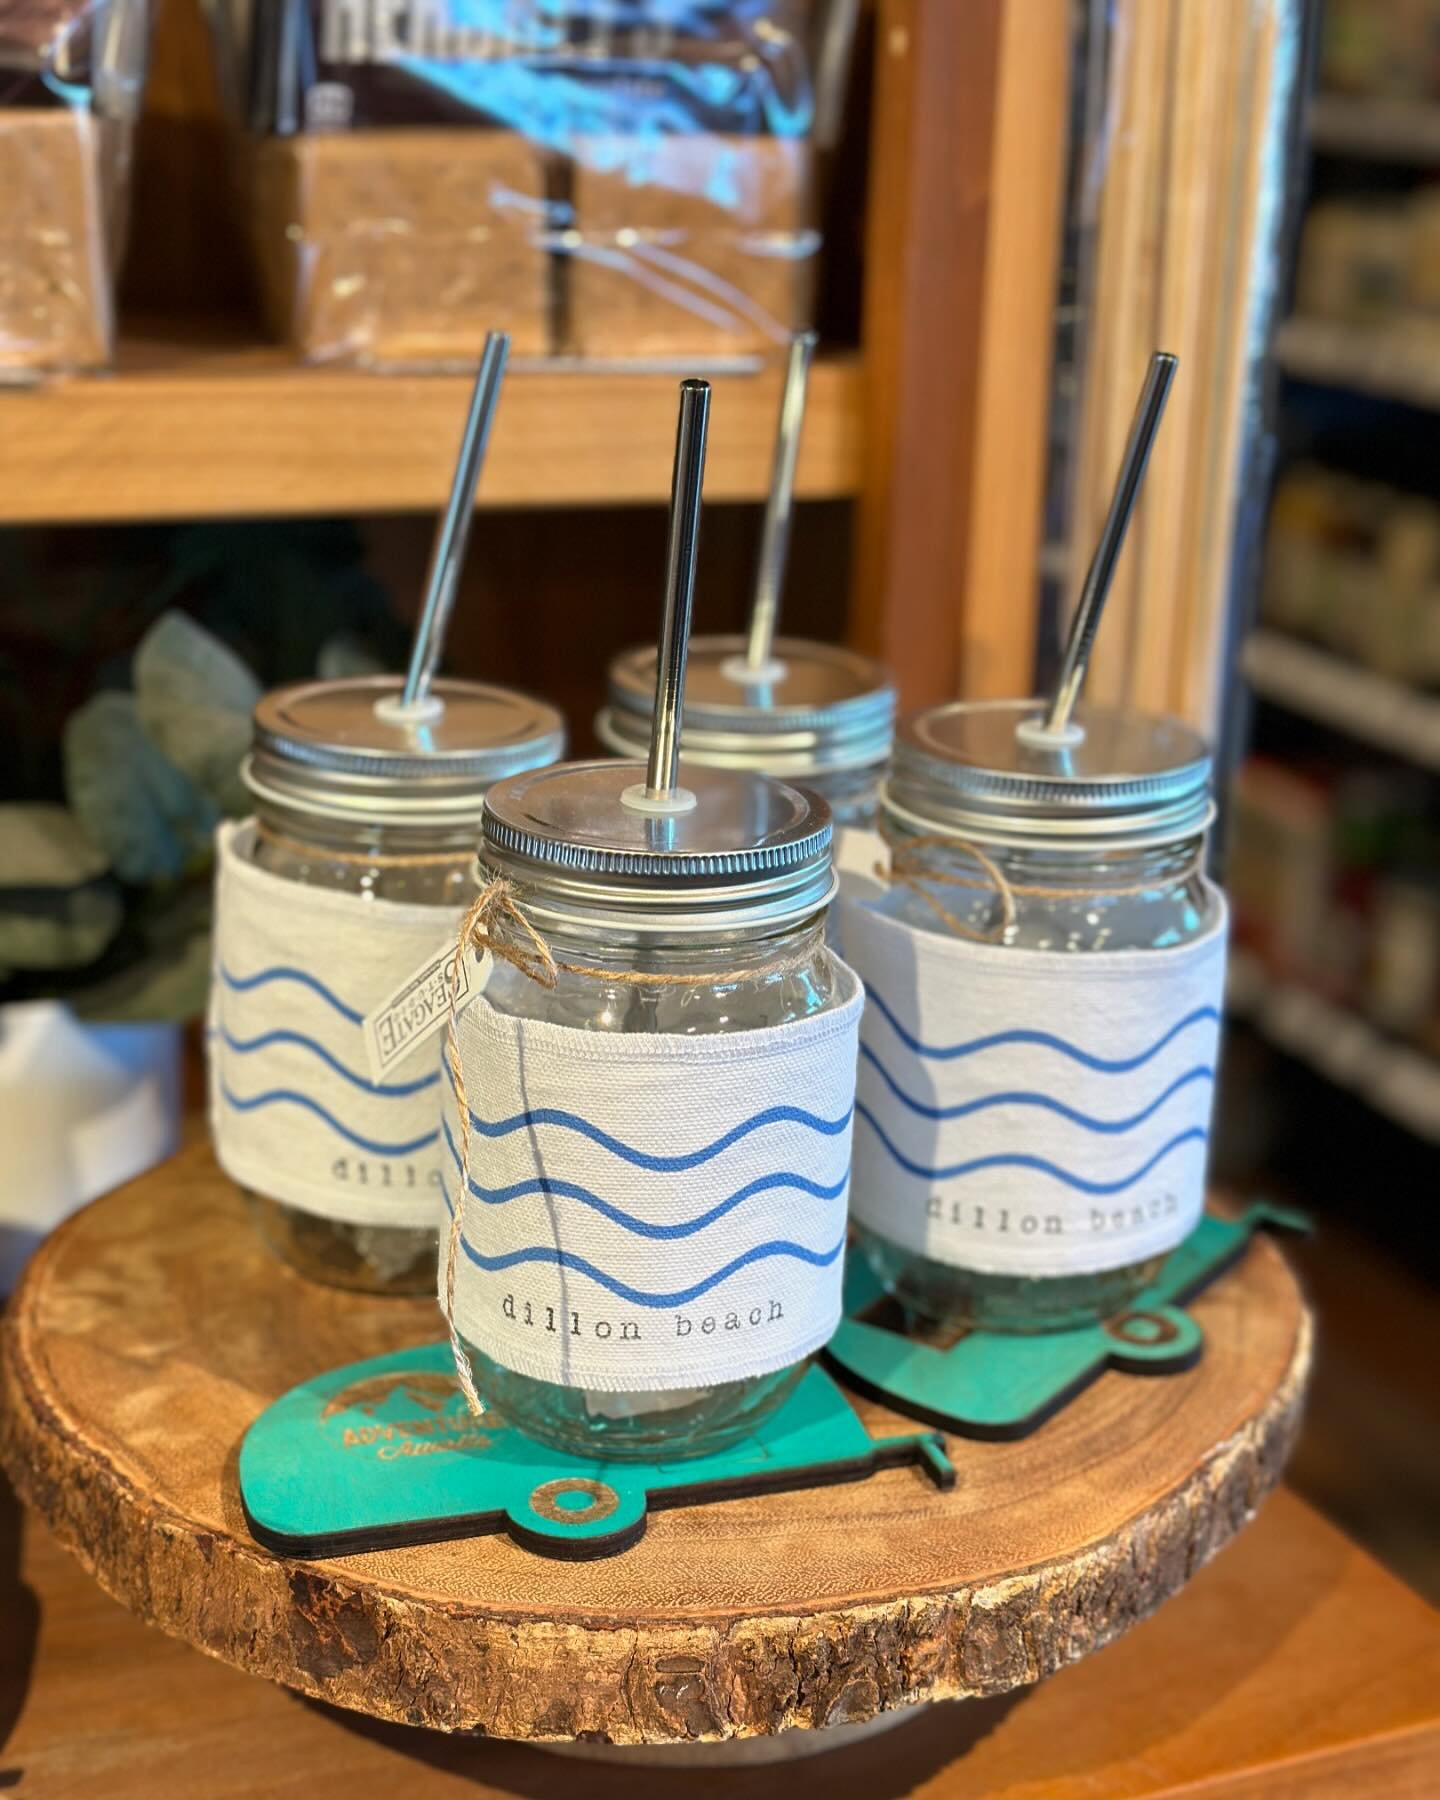 I spy with my little eye 👀&hellip; some new products! 🥳
We&rsquo;re always bringing fun new things into the General Store, like these custom cups from @seagate.studio! It&rsquo;s like a treasure hunt every time you visit us 🗺️
&bull;
The General S